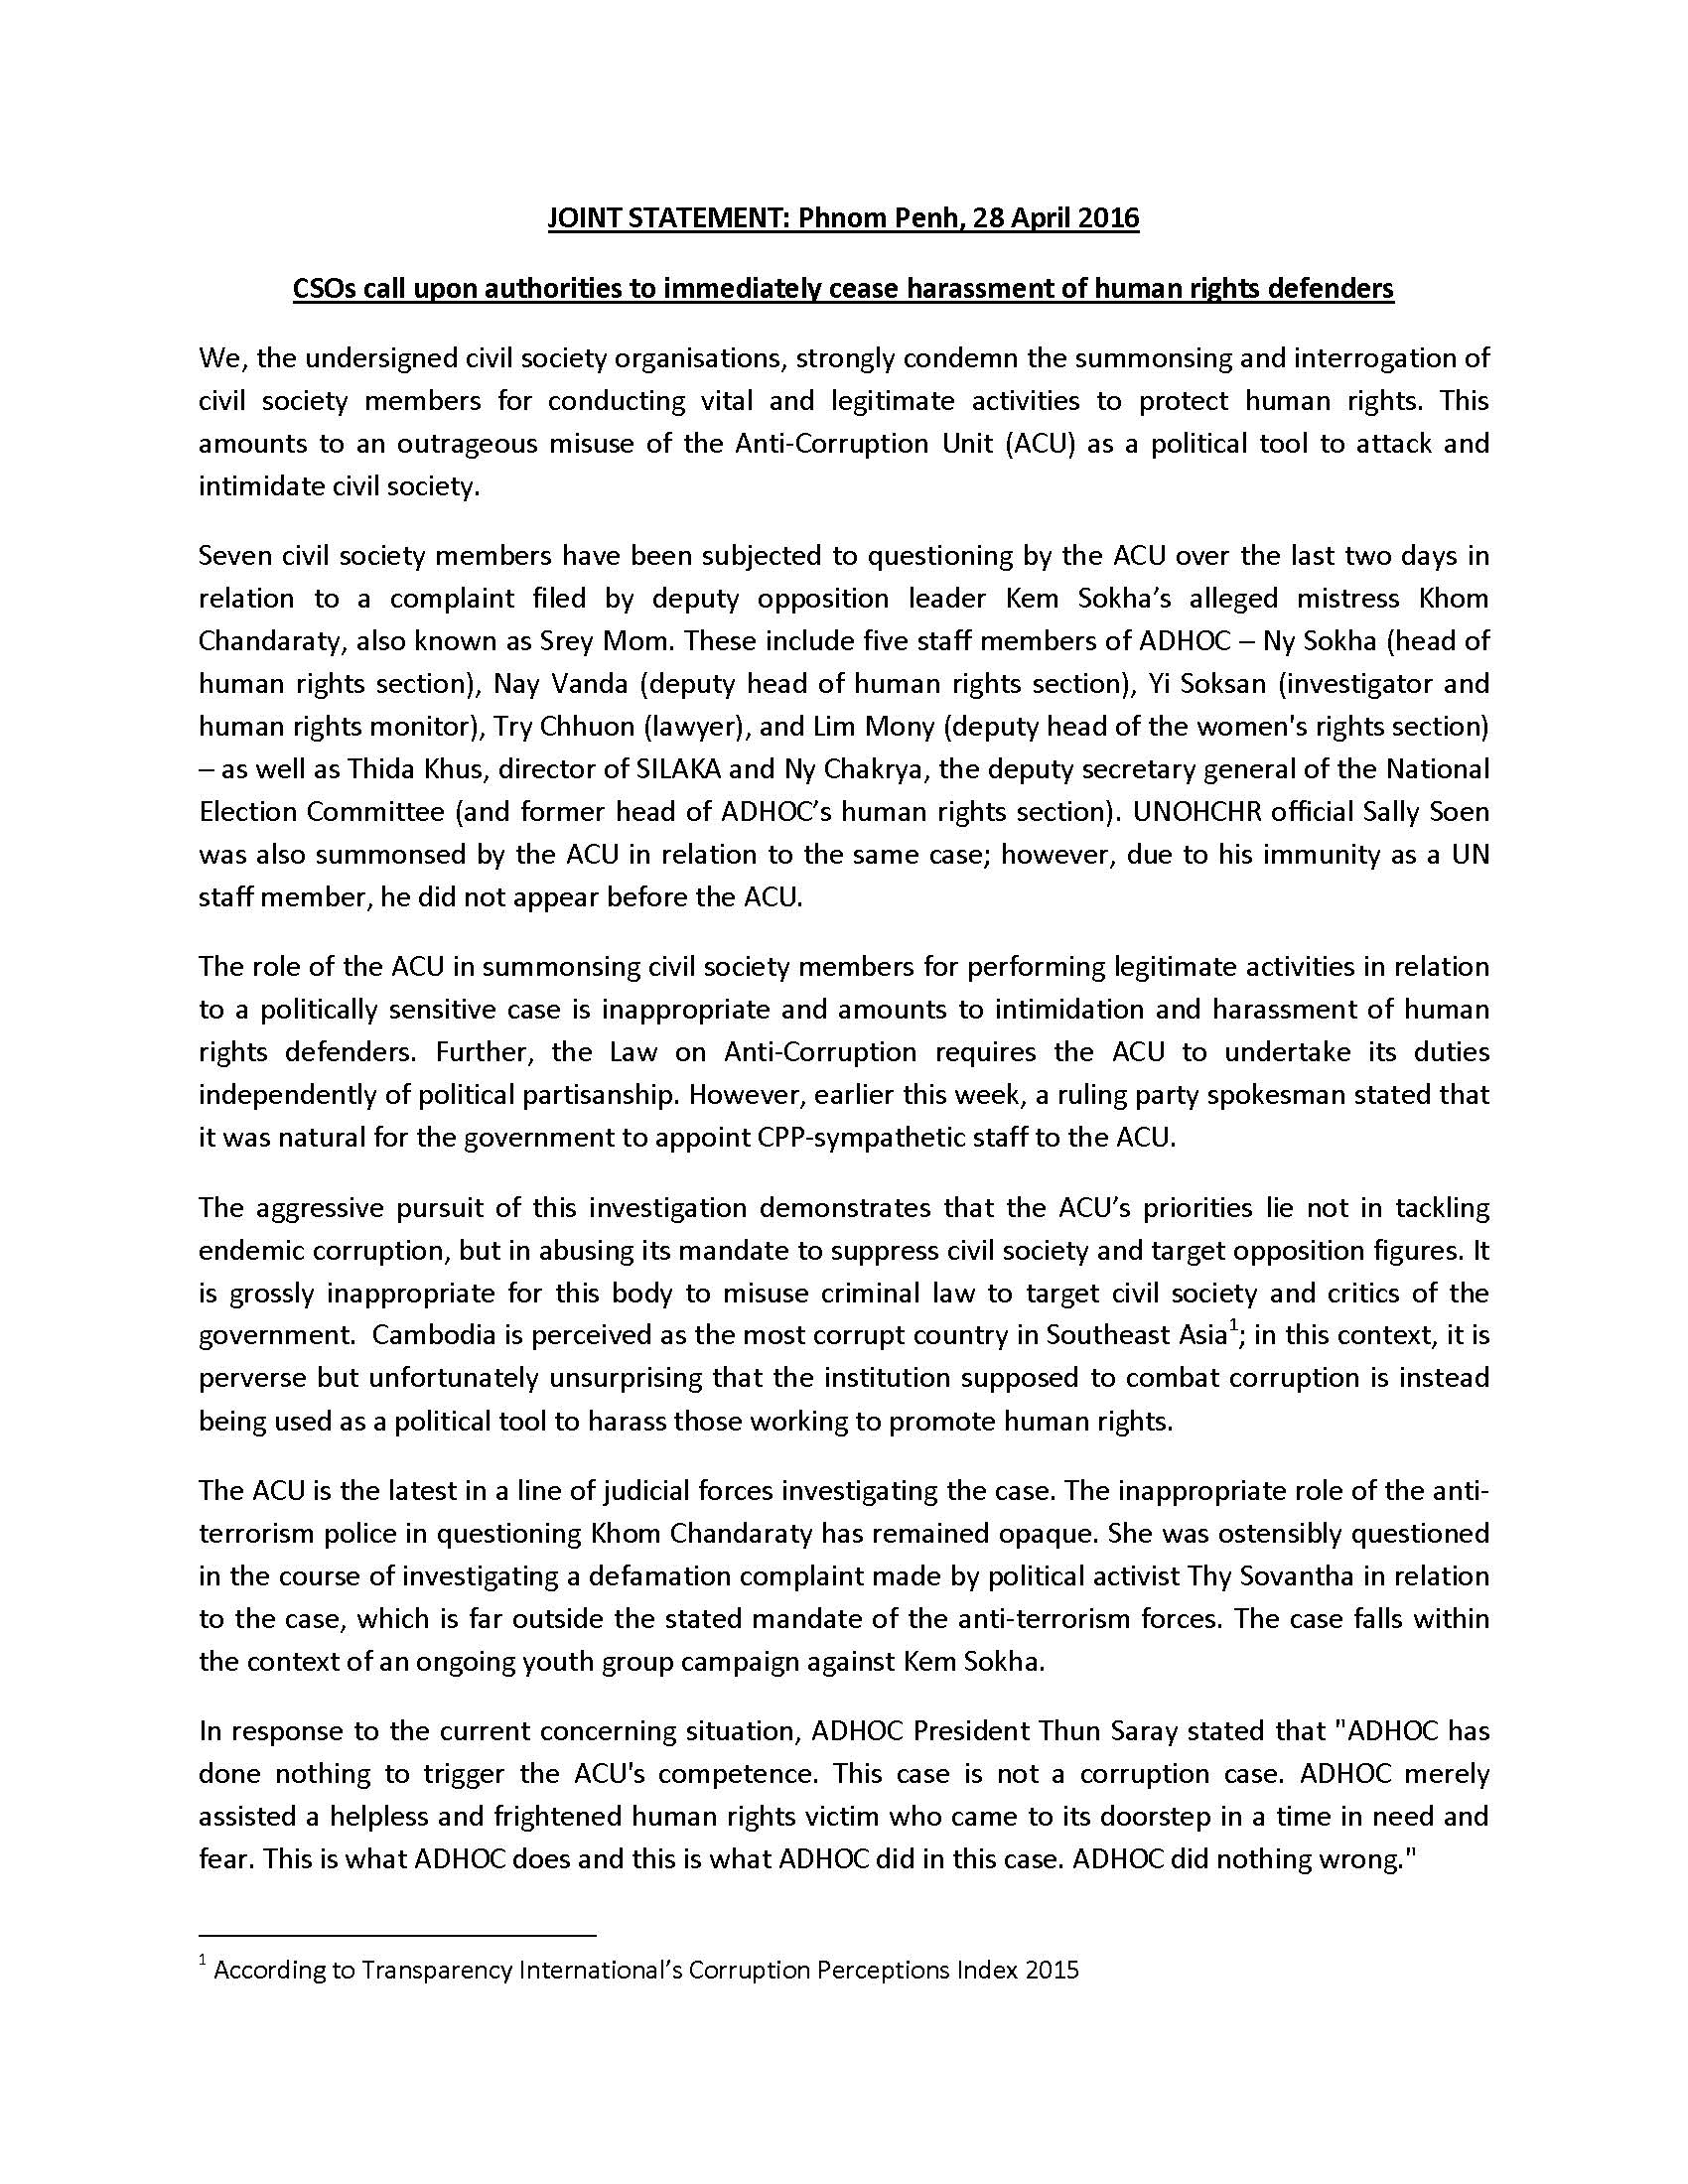 402Joint Press Release - CSOs call upon the authorities to immediately cease harrassment of human rights defenders _(ENG)-2_Page_1